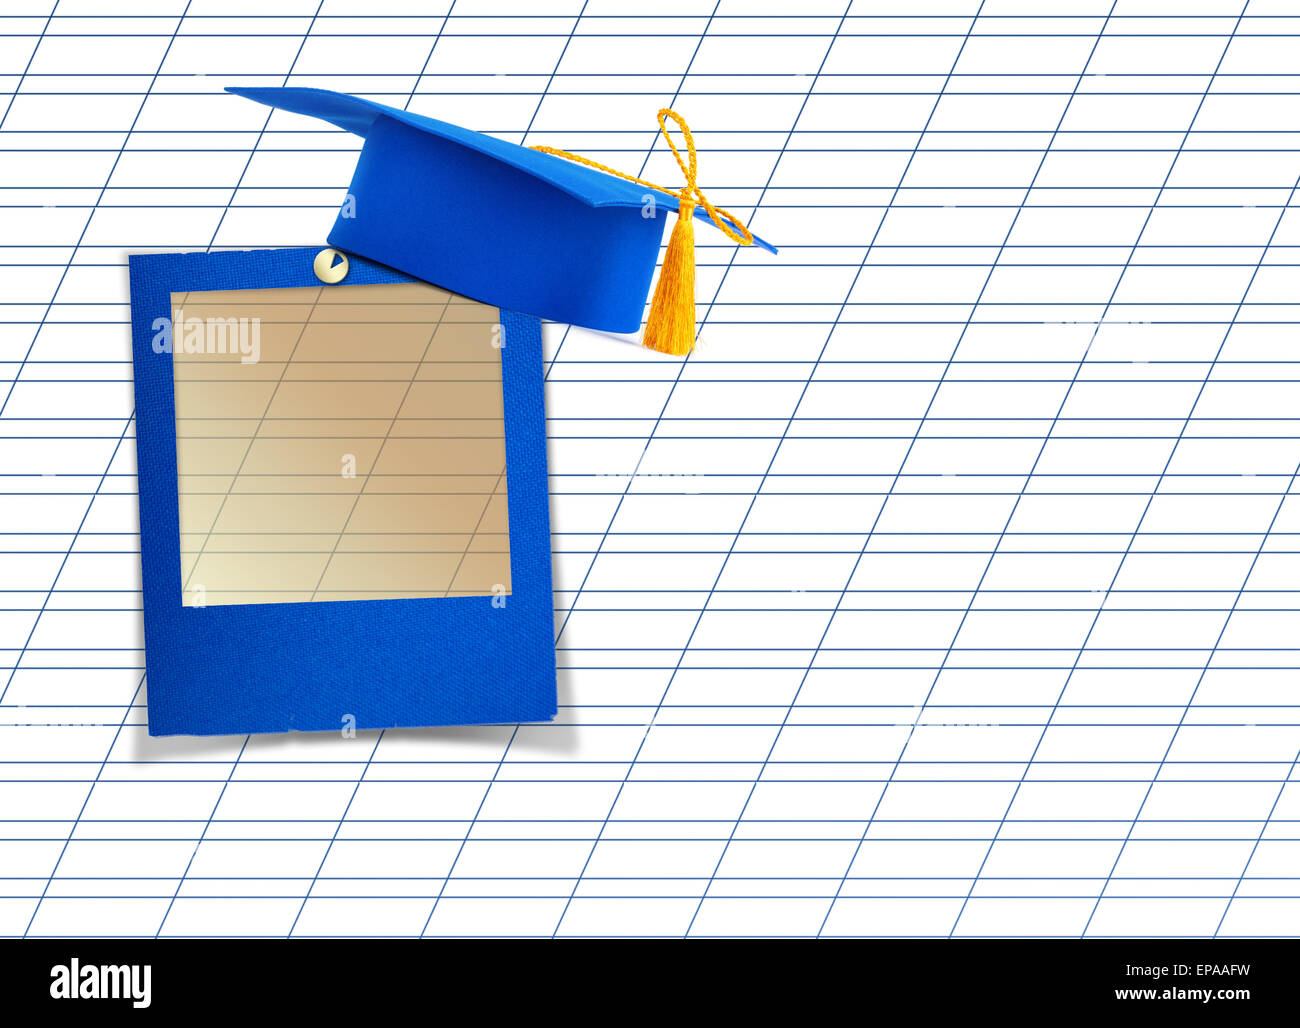 Mortar board or graduation cap with blue slide on the background notebook sheet Stock Photo